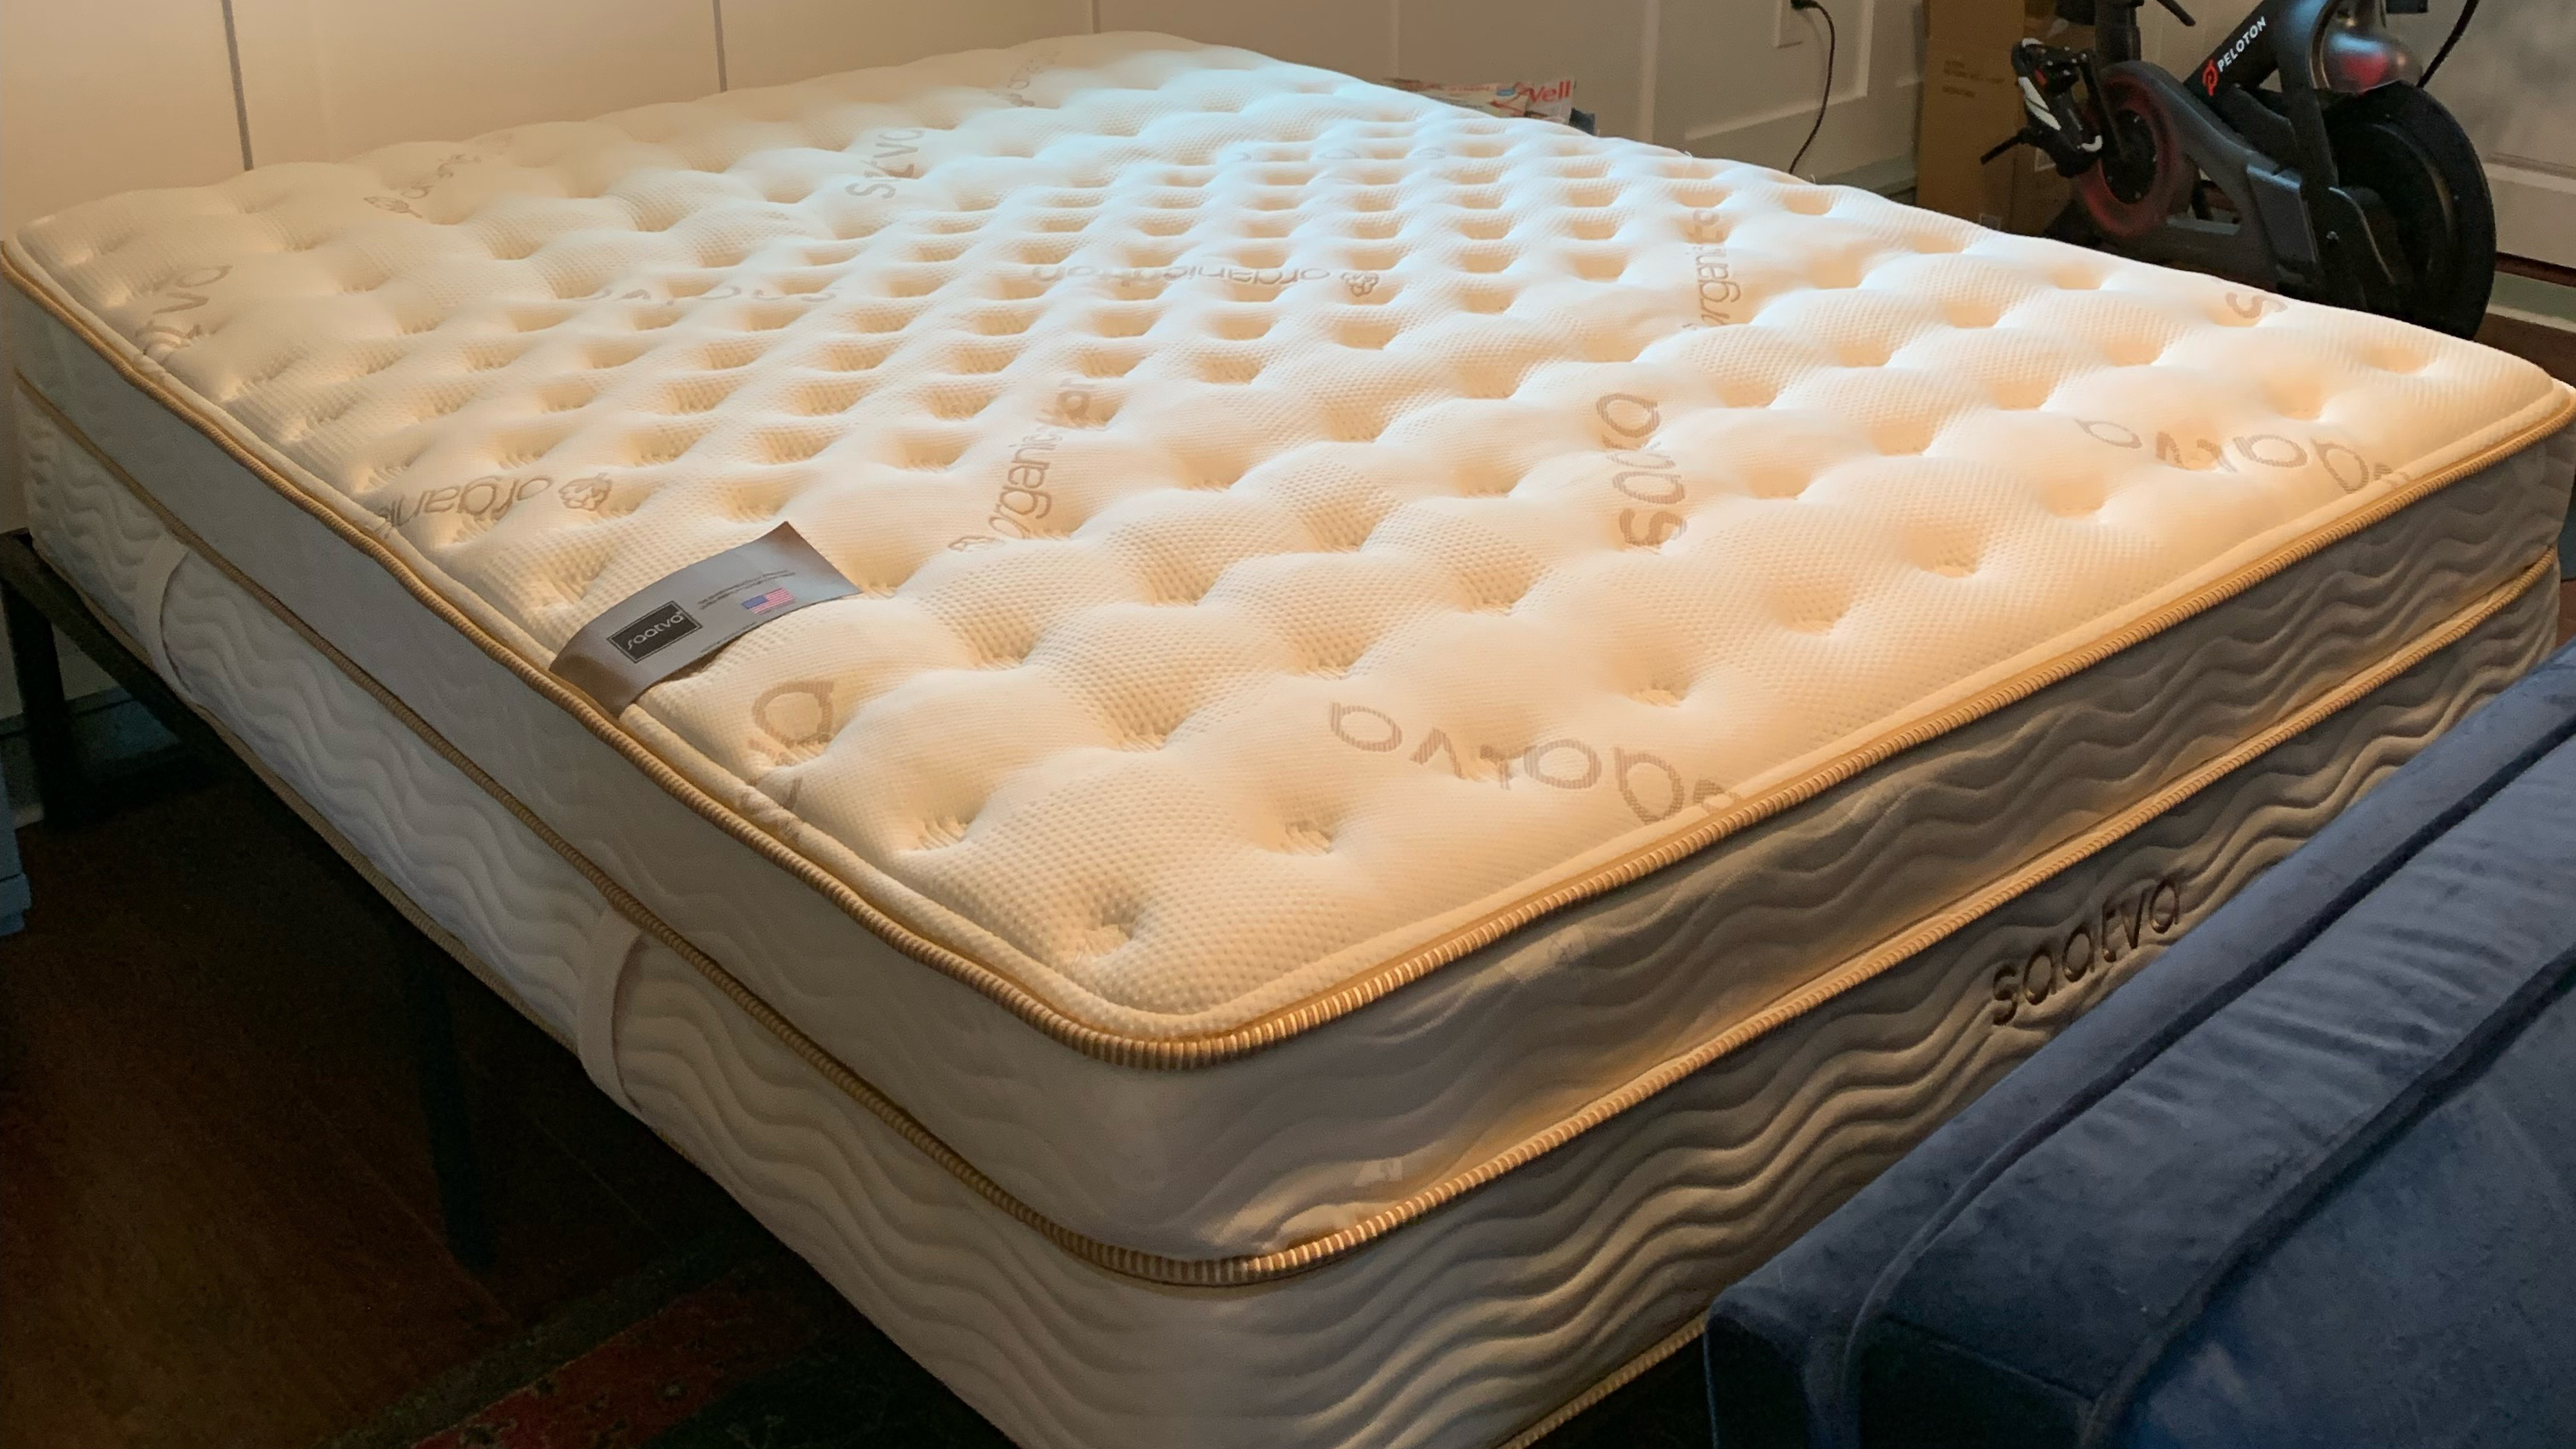 The image shows the Saatva Classic mattress placed on a basic bed frame